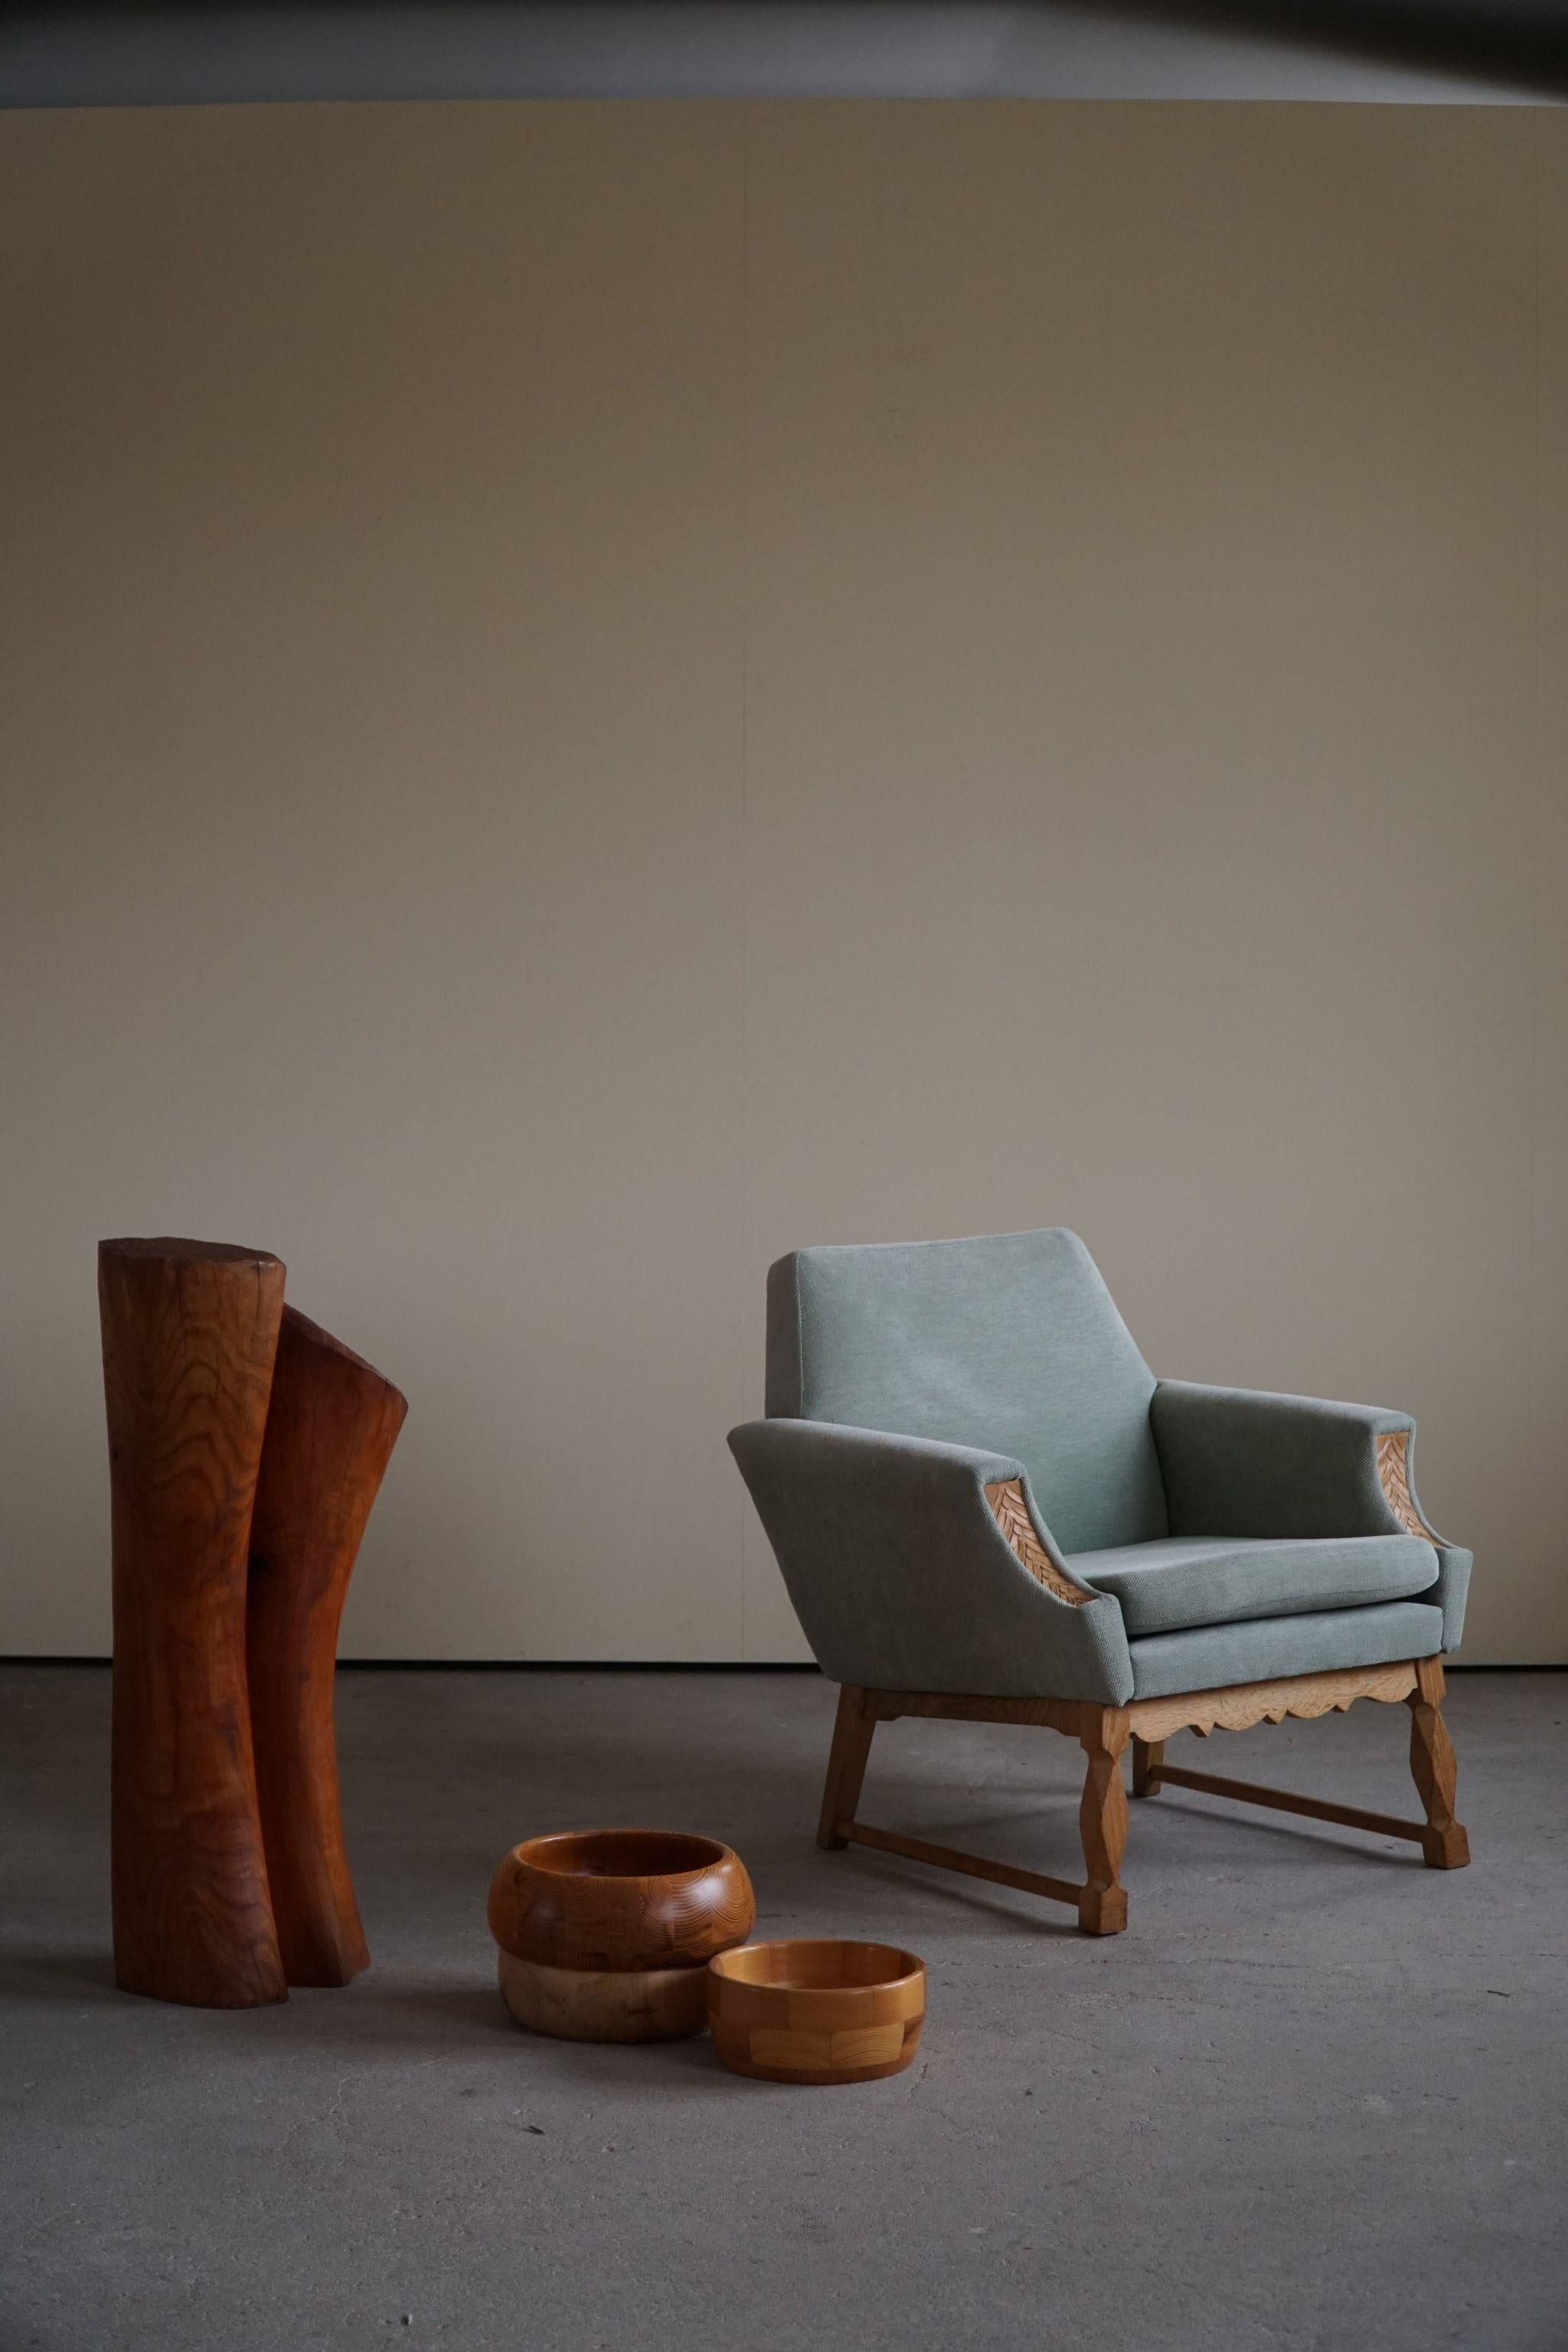 A decorative pair of mid century lounge chairs in turquoise/green velvet and solid oak. Made by a Danish Cabinetmaker in 1960s. Nice details, such as the carved armrest. 

These nice vintage chairs fits in many interior styles. Modern interior,